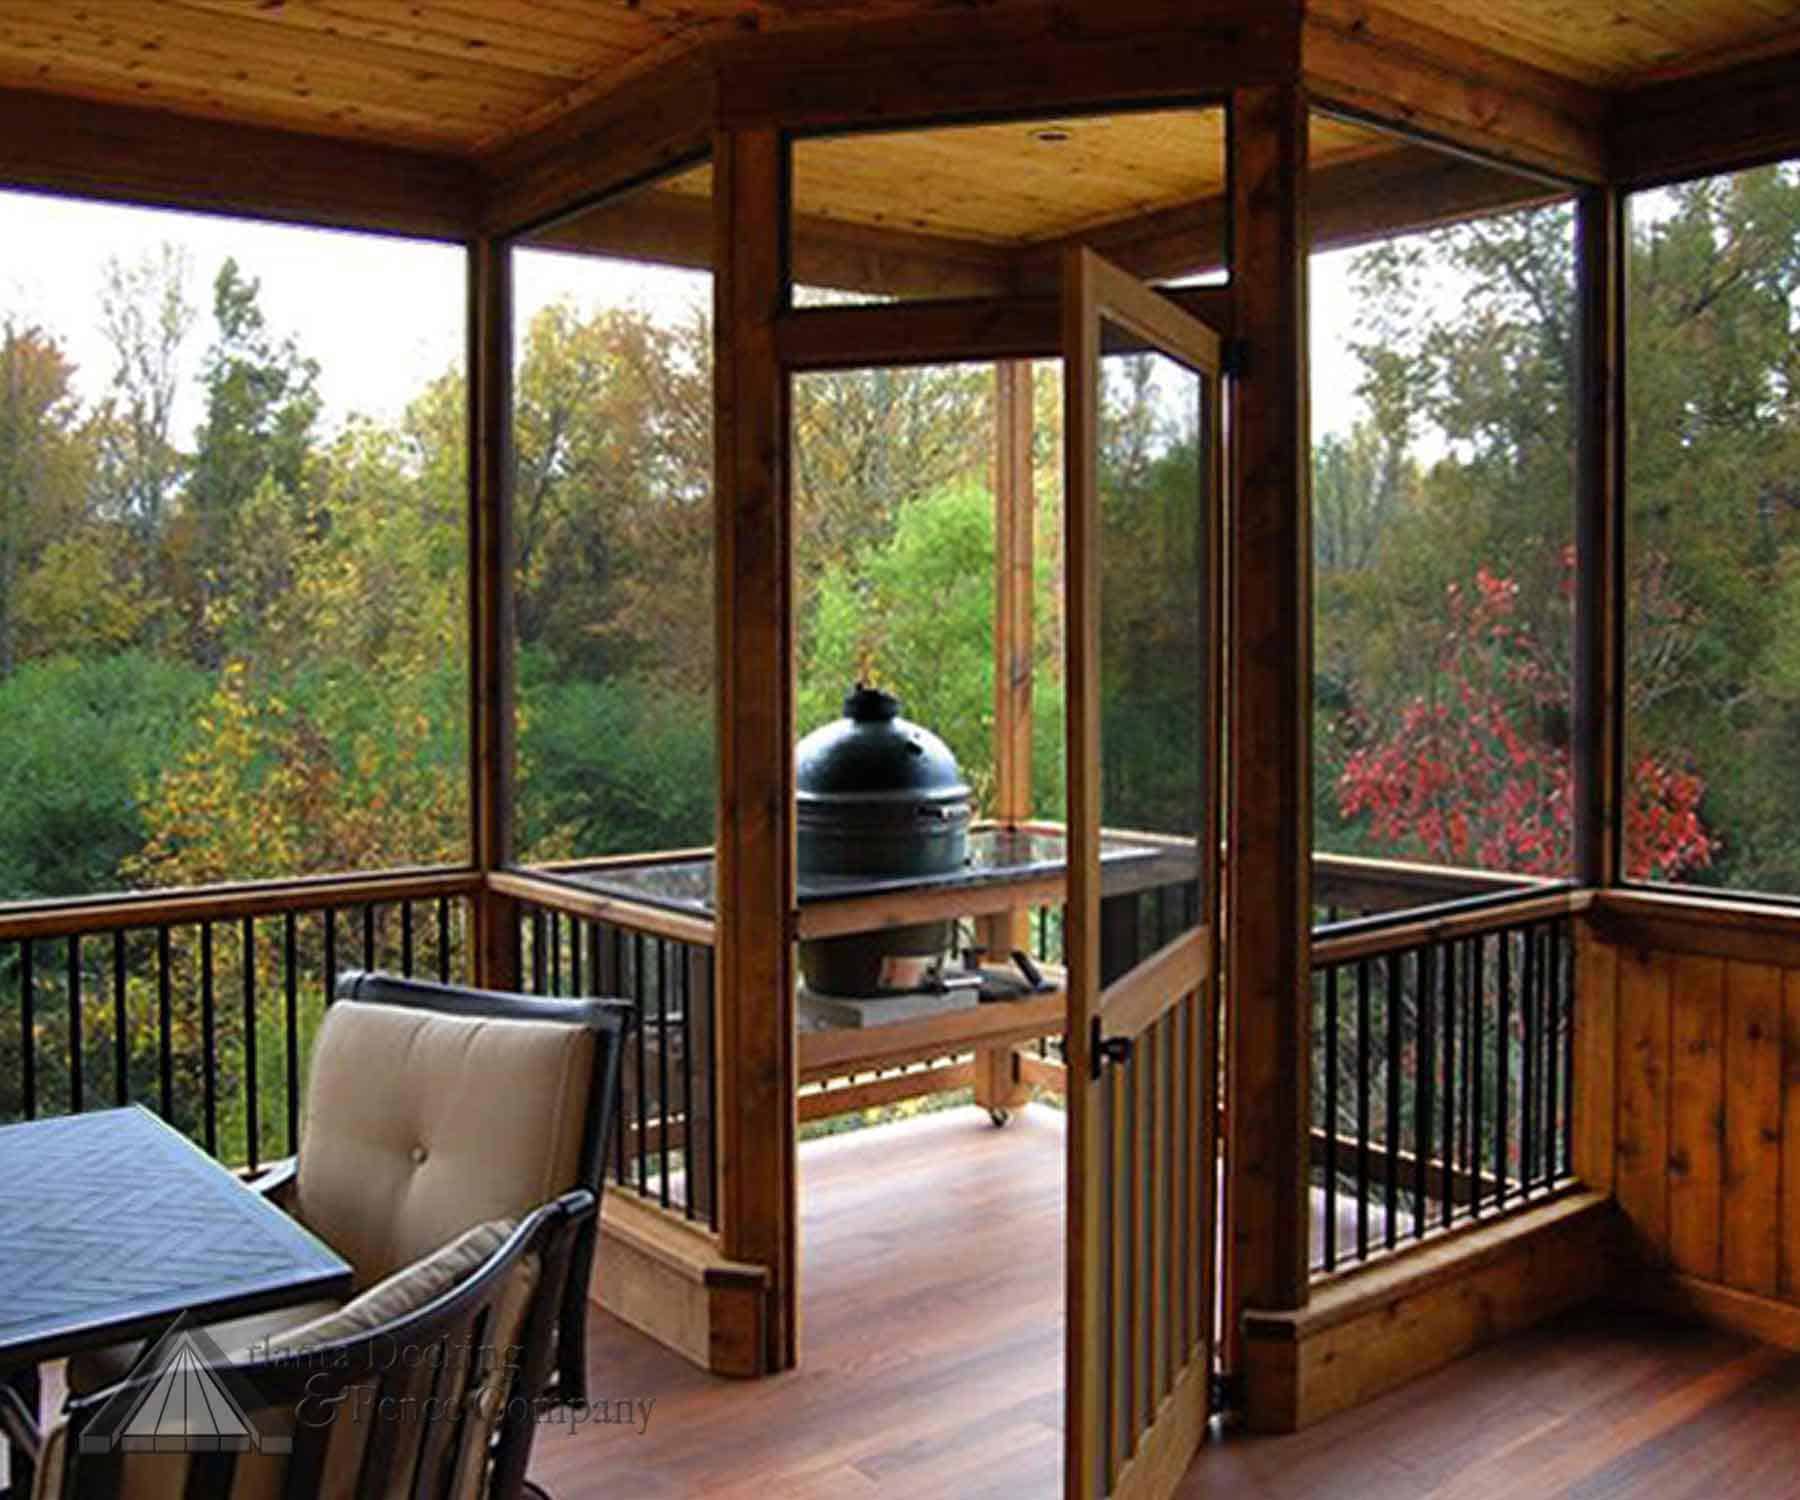 Remarkable Screened In Porch Ideas With Deck Images Decoration Ideas in ...